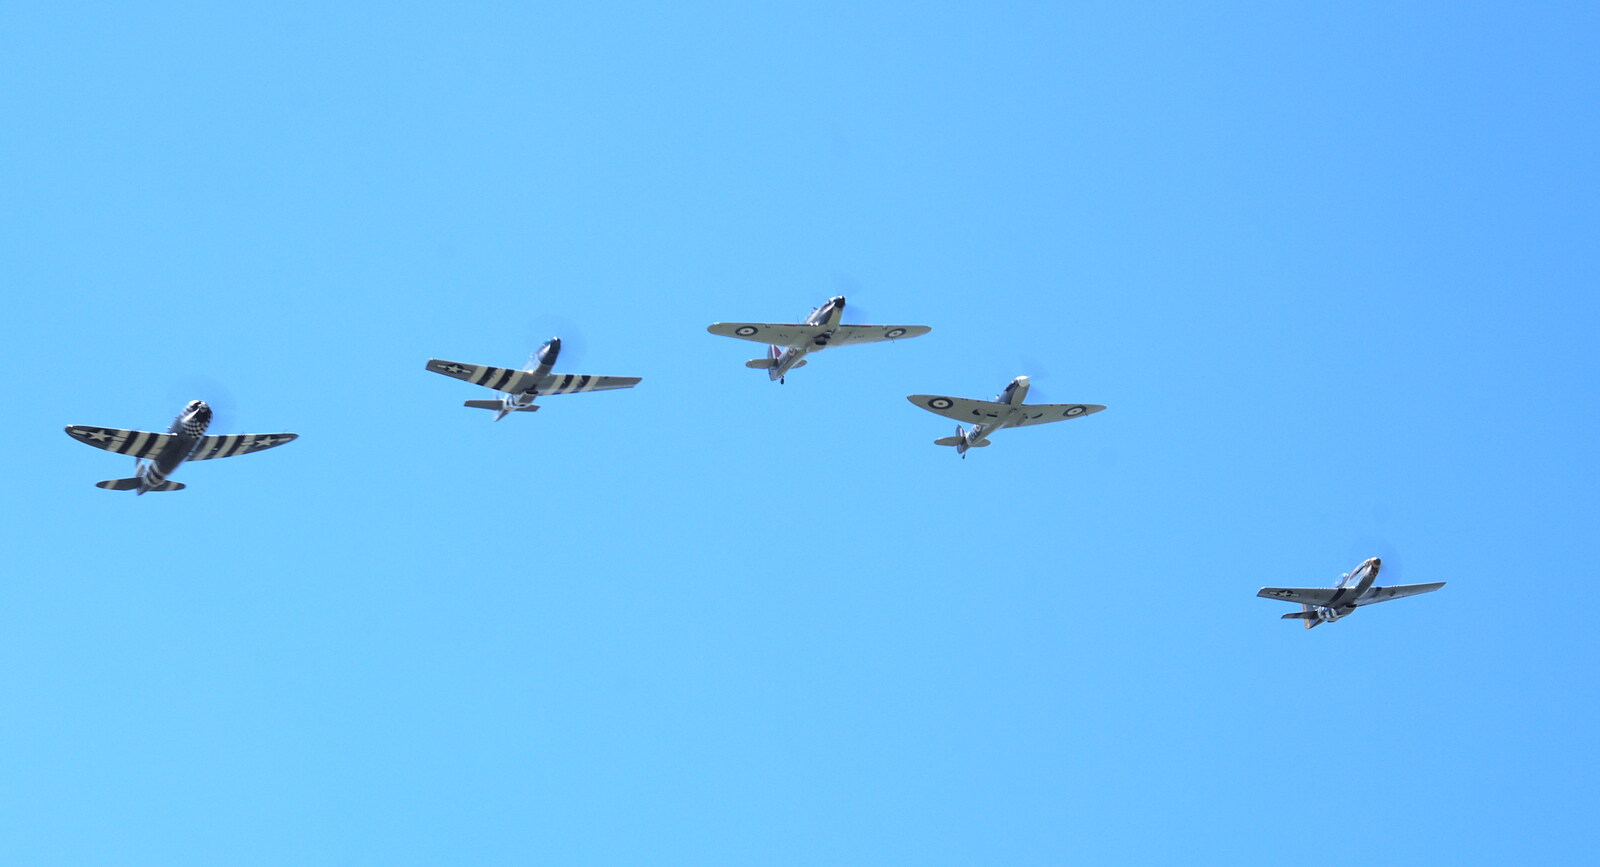 Eagle Squadron flies over first from A "Sally B" B-17 Flypast, Thorpe Abbots, Norfolk - 27th May 2013